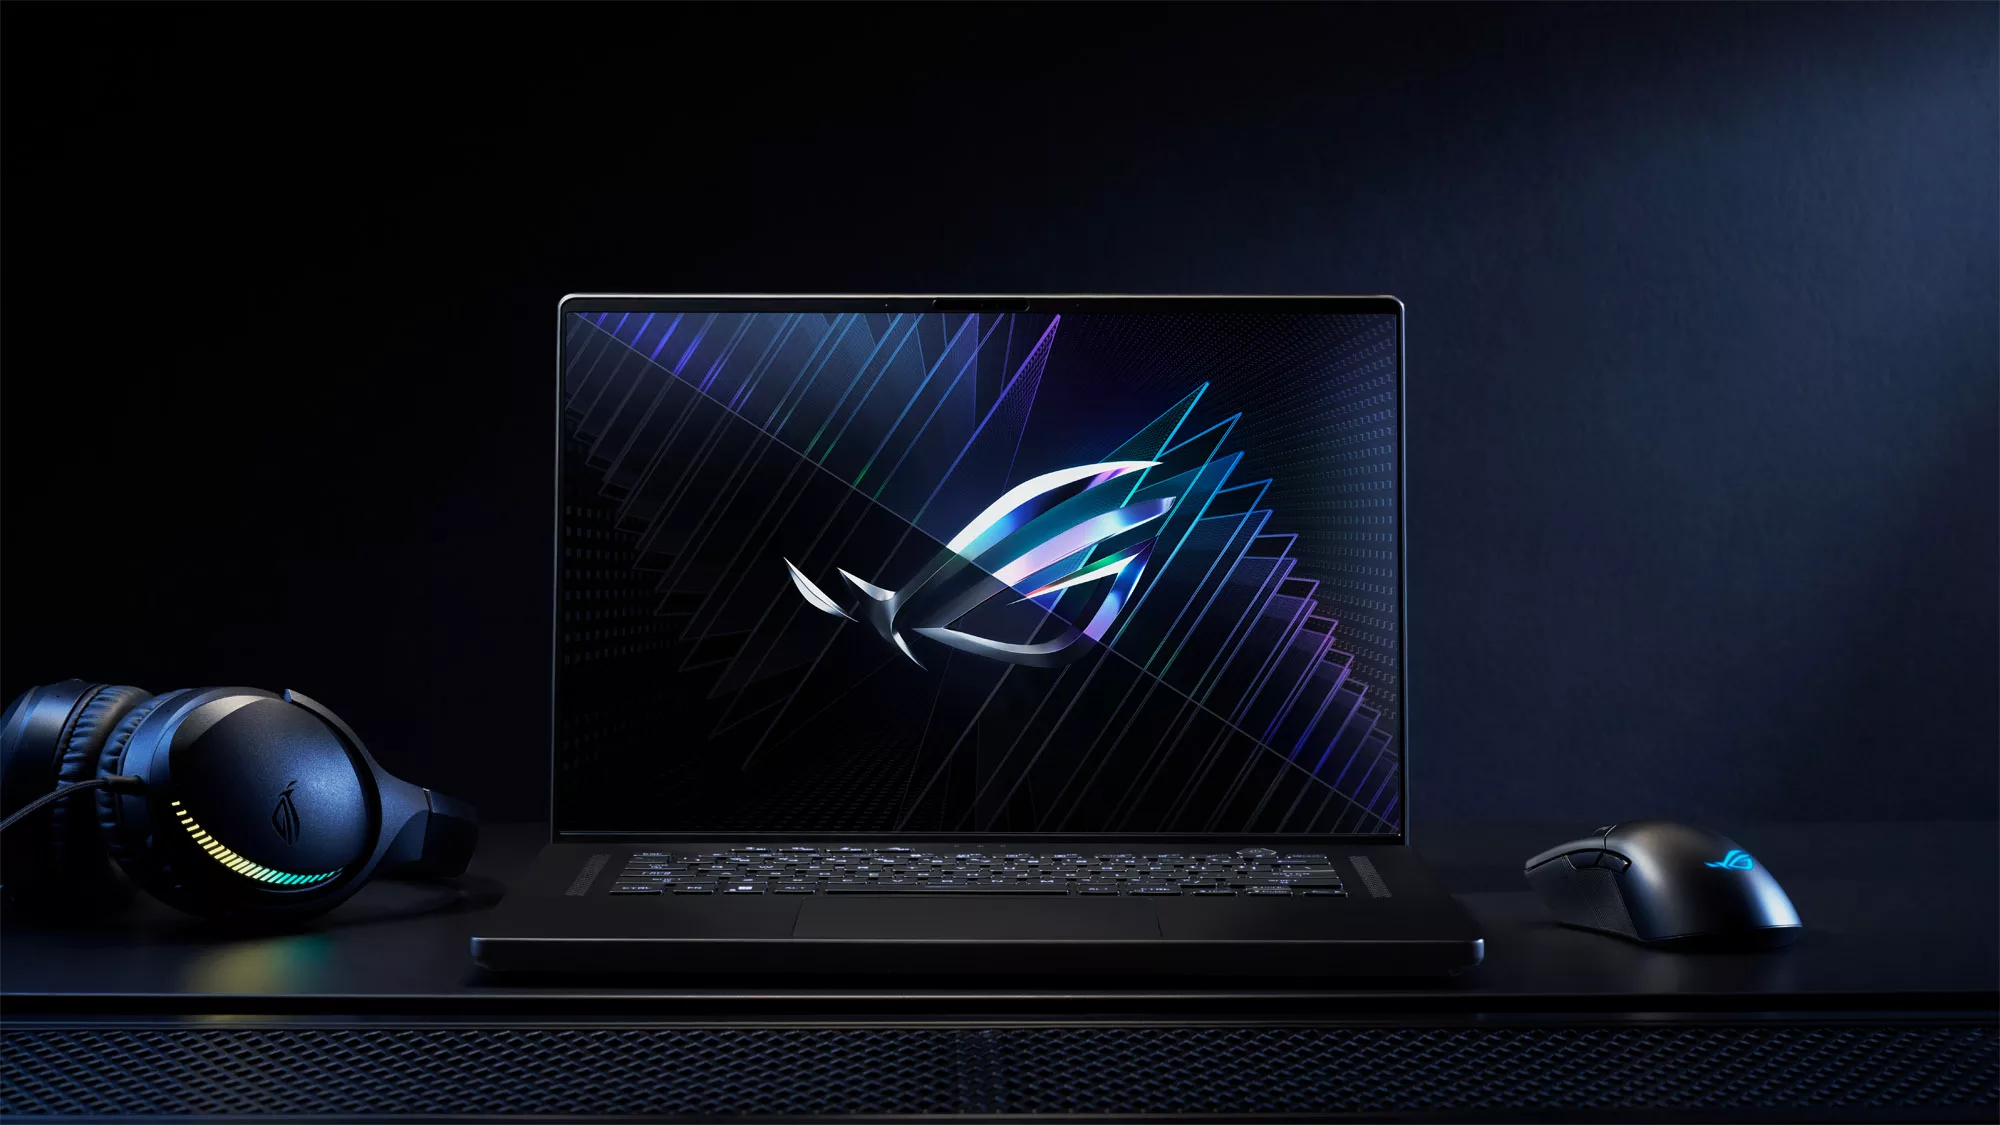 The 2023 ROG Zephyrus M16 laptop, sitting on a desk with the ROG logo on-screen.